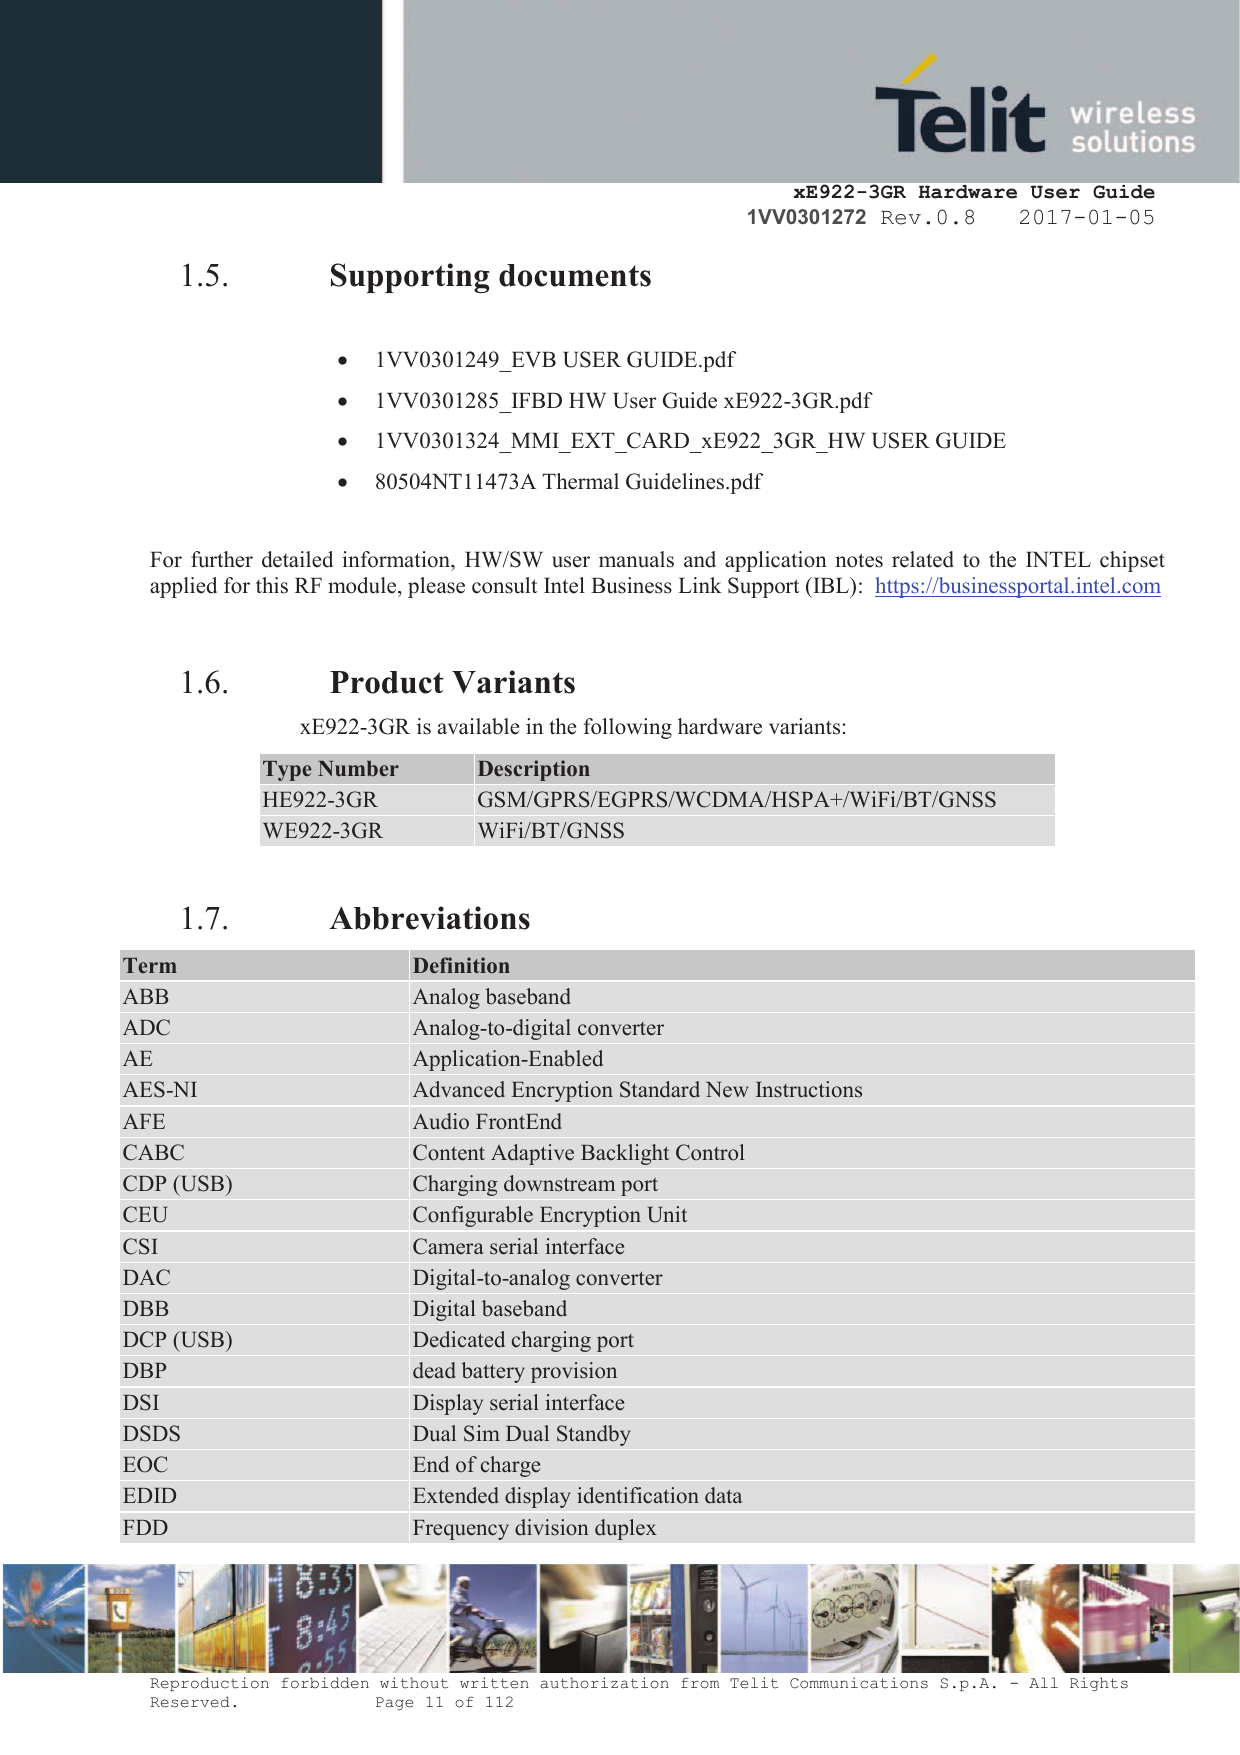     xE922-3GR Hardware User Guide 1VV0301272 Rev.0.8   2017-01-05 Reproduction forbidden without written authorization from Telit Communications S.p.A. - All Rights Reserved.    Page 11 of 112  1.5. Supporting documents  · 1VV0301249_EVB USER GUIDE.pdf  · 1VV0301285_IFBD HW User Guide xE922-3GR.pdf  · 1VV0301324_MMI_EXT_CARD_xE922_3GR_HW USER GUIDE · 80504NT11473A Thermal Guidelines.pdf  For further detailed information, HW/SW  user manuals and application notes related to the INTEL chipset applied for this RF module, please consult Intel Business Link Support (IBL):  https://businessportal.intel.com  1.6. Product Variants xE922-3GR is available in the following hardware variants: Type Number Description HE922-3GR GSM/GPRS/EGPRS/WCDMA/HSPA+/WiFi/BT/GNSS WE922-3GR WiFi/BT/GNSS  1.7. Abbreviations Term Definition ABB Analog baseband ADC Analog-to-digital converter AE Application-Enabled AES-NI Advanced Encryption Standard New Instructions AFE Audio FrontEnd CABC Content Adaptive Backlight Control CDP (USB) Charging downstream port CEU Configurable Encryption Unit CSI Camera serial interface DAC Digital-to-analog converter DBB Digital baseband DCP (USB) Dedicated charging port DBP  dead battery provision DSI Display serial interface DSDS Dual Sim Dual Standby EOC End of charge EDID Extended display identification data FDD Frequency division duplex 